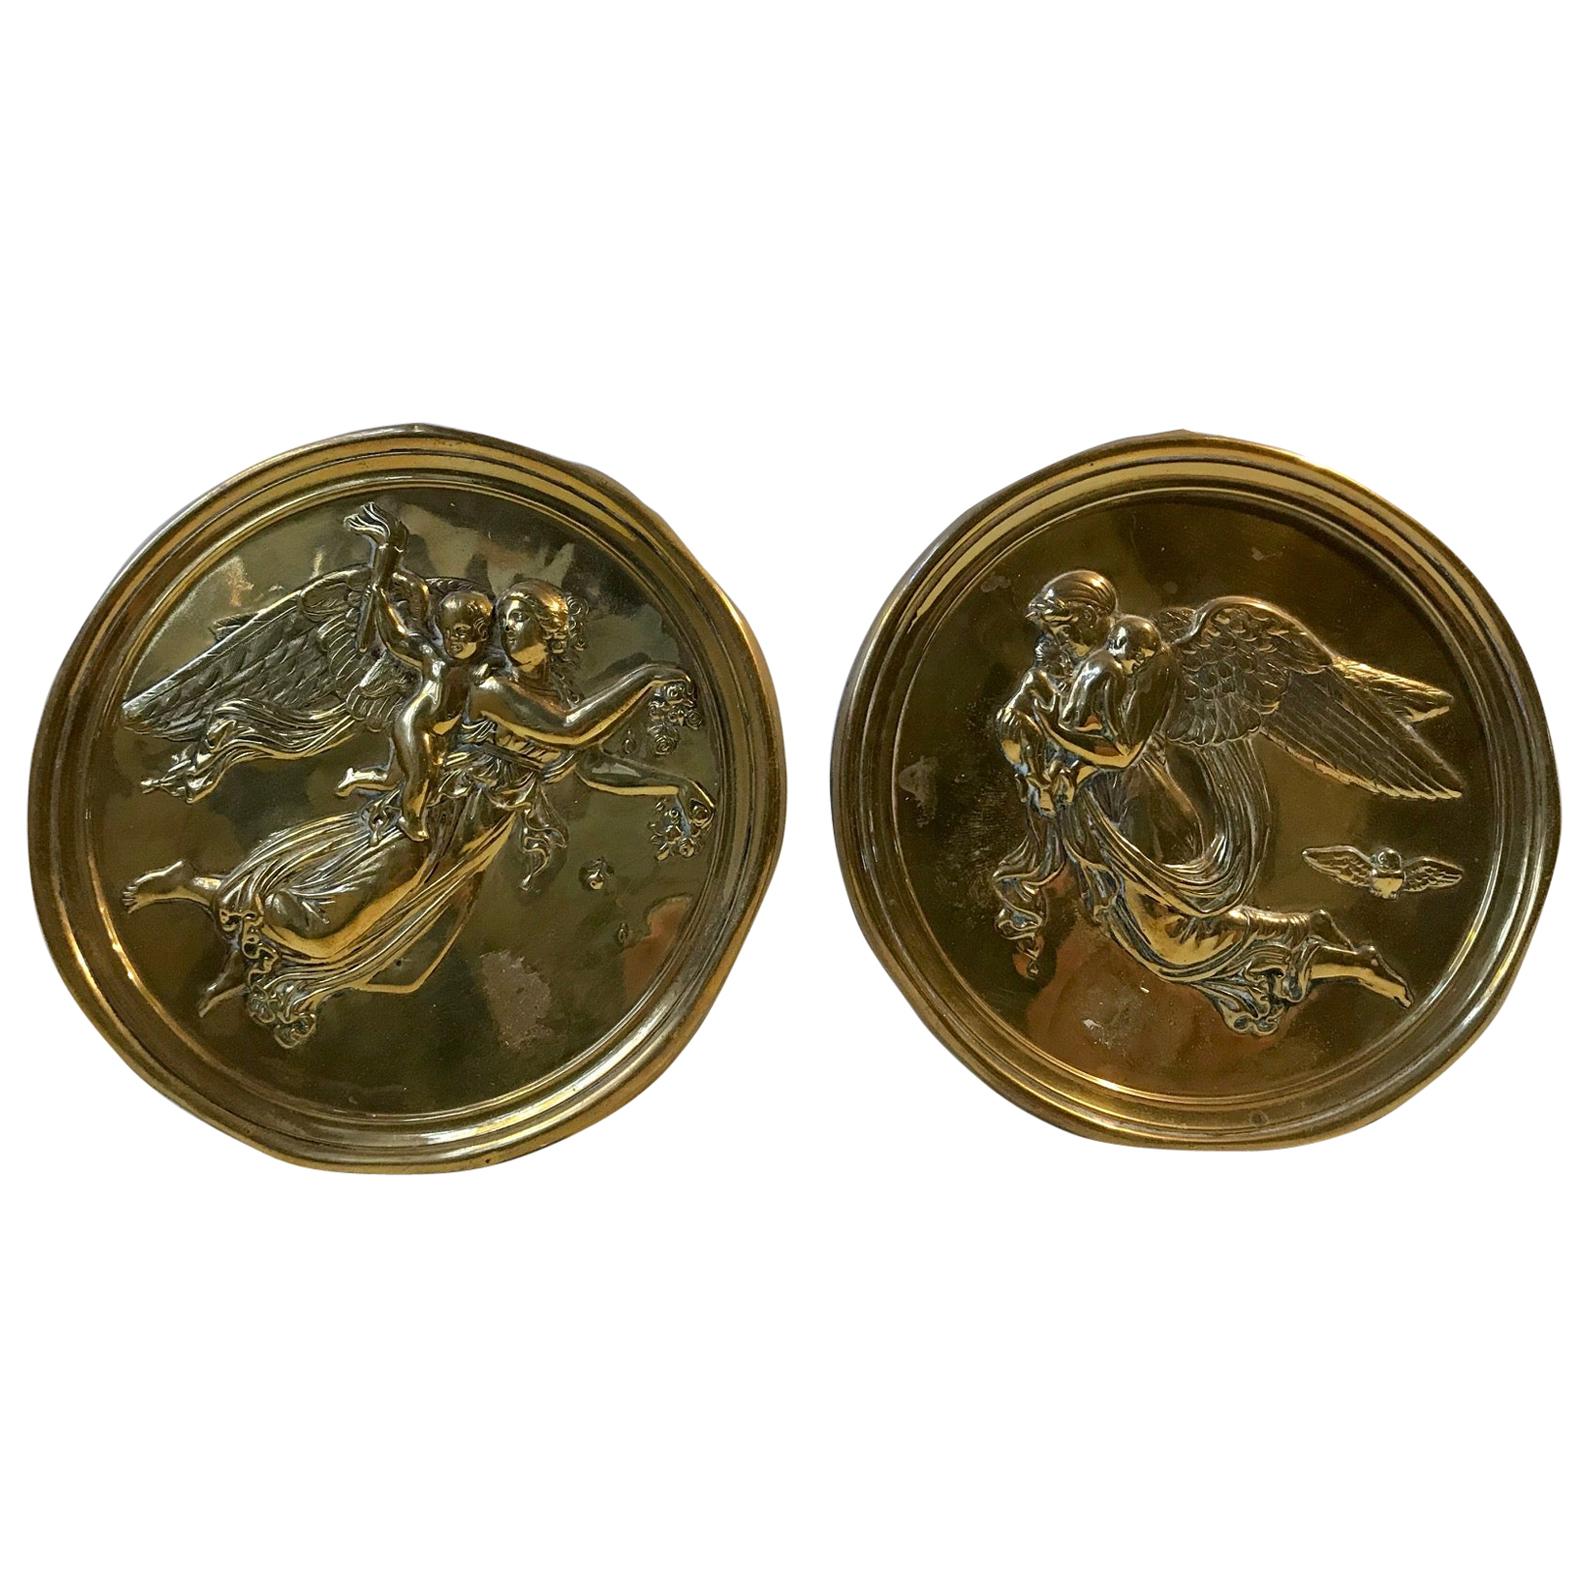 Victorian Brass Wall Plaques with Woman and Angles, 19th Century, England